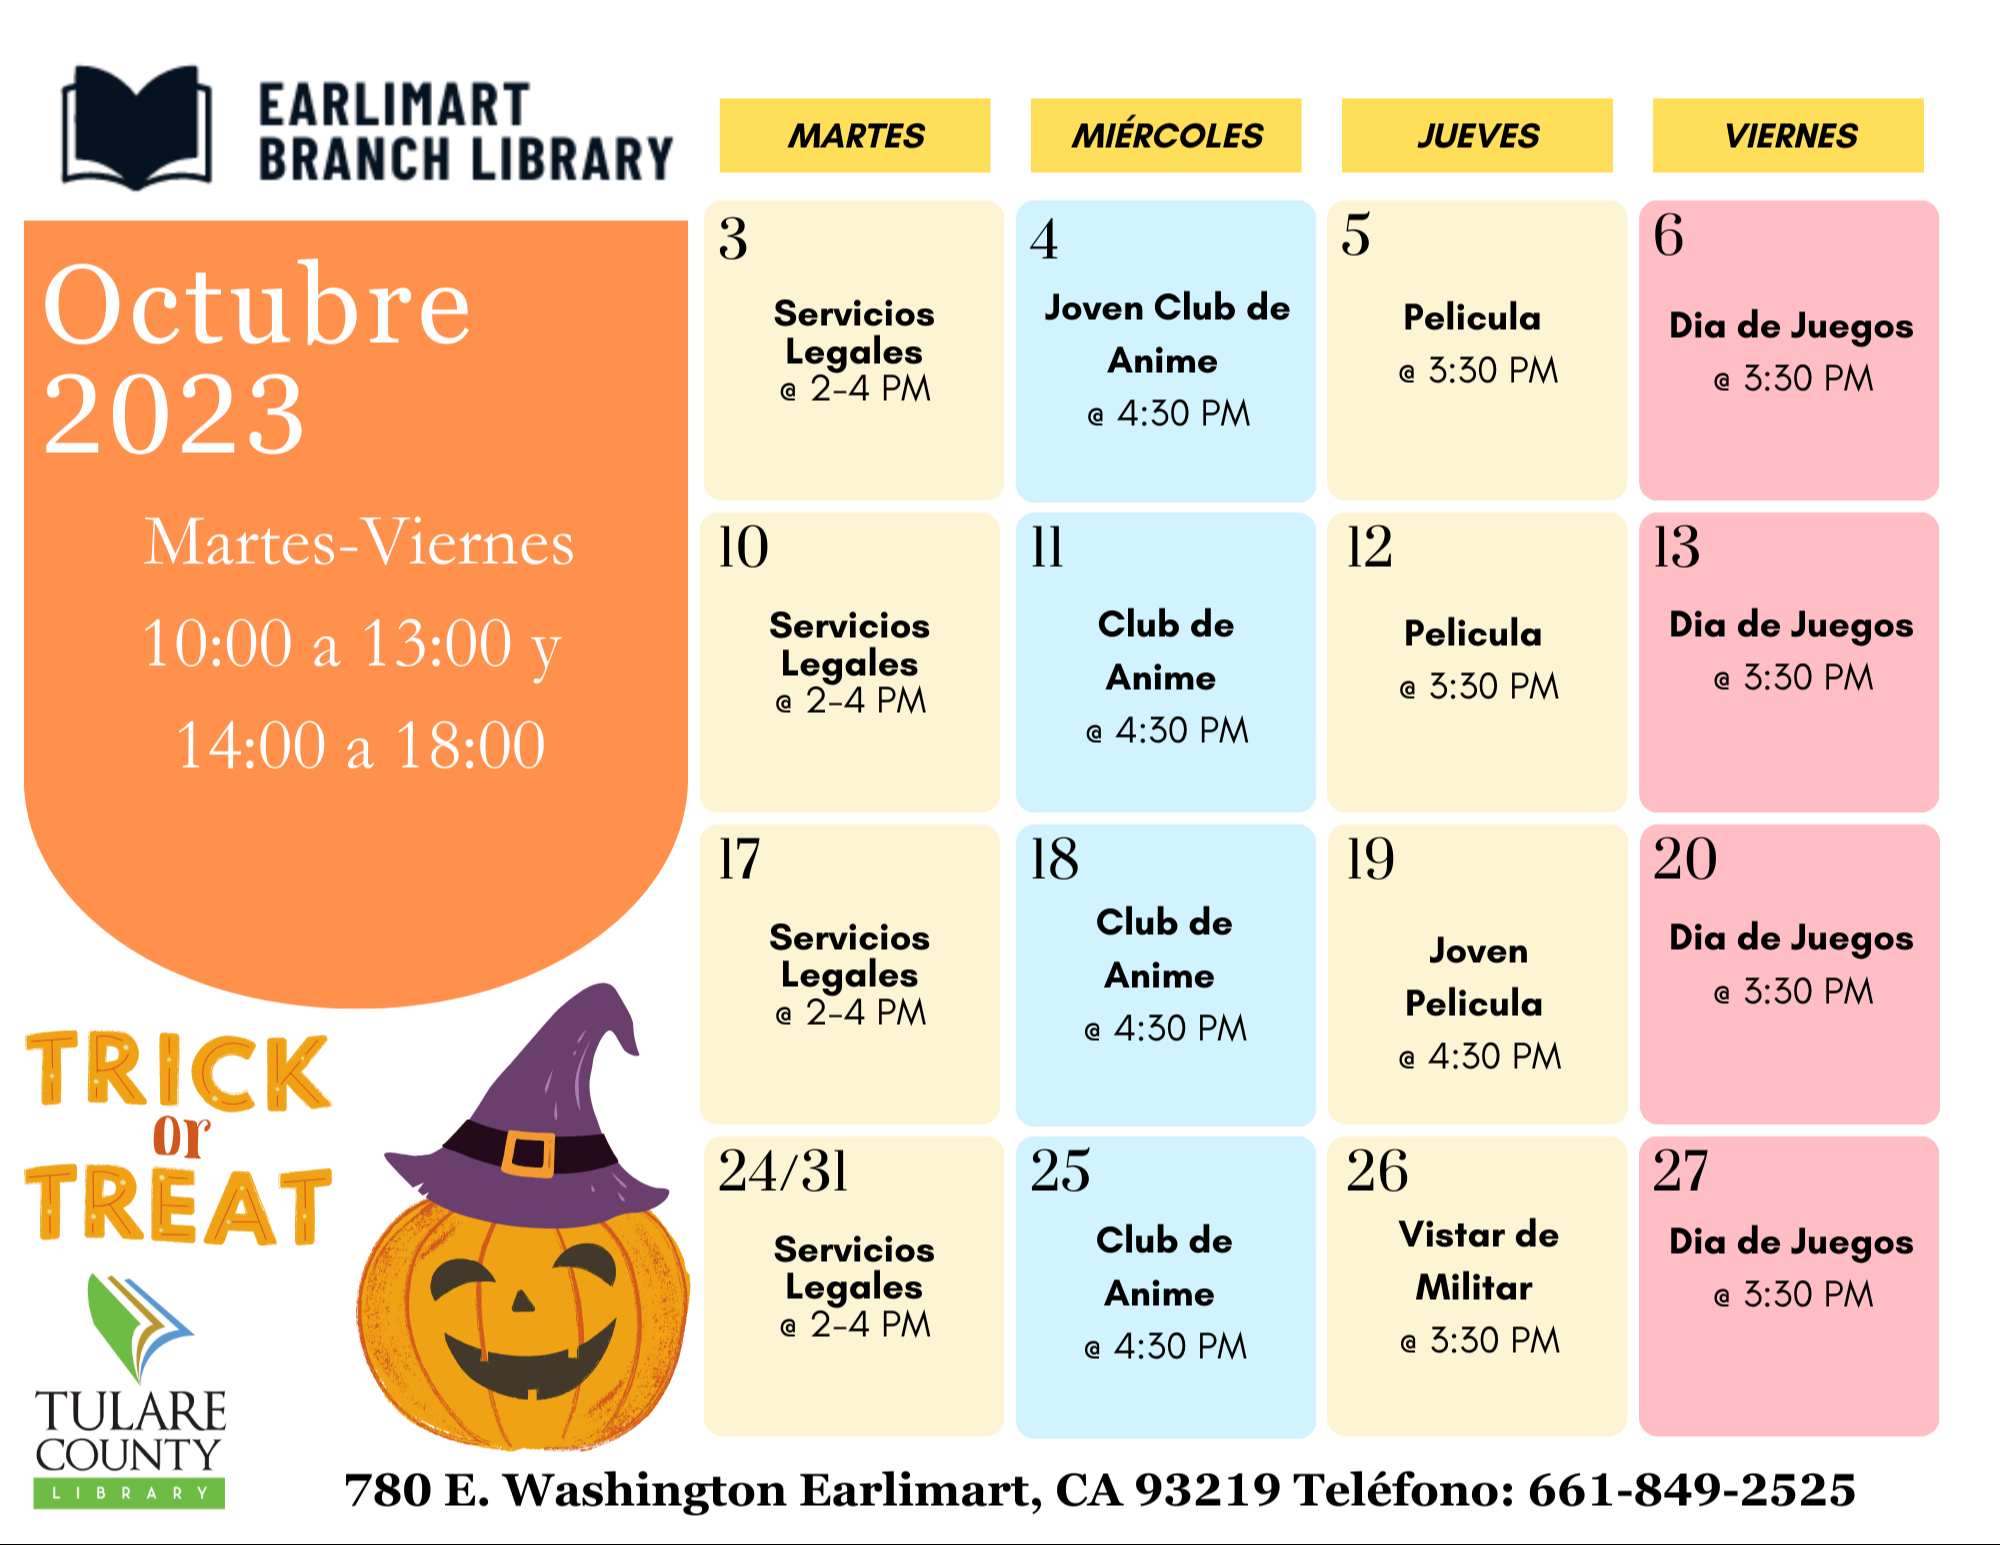 Tulare county library logo, Event calendar (information in article)